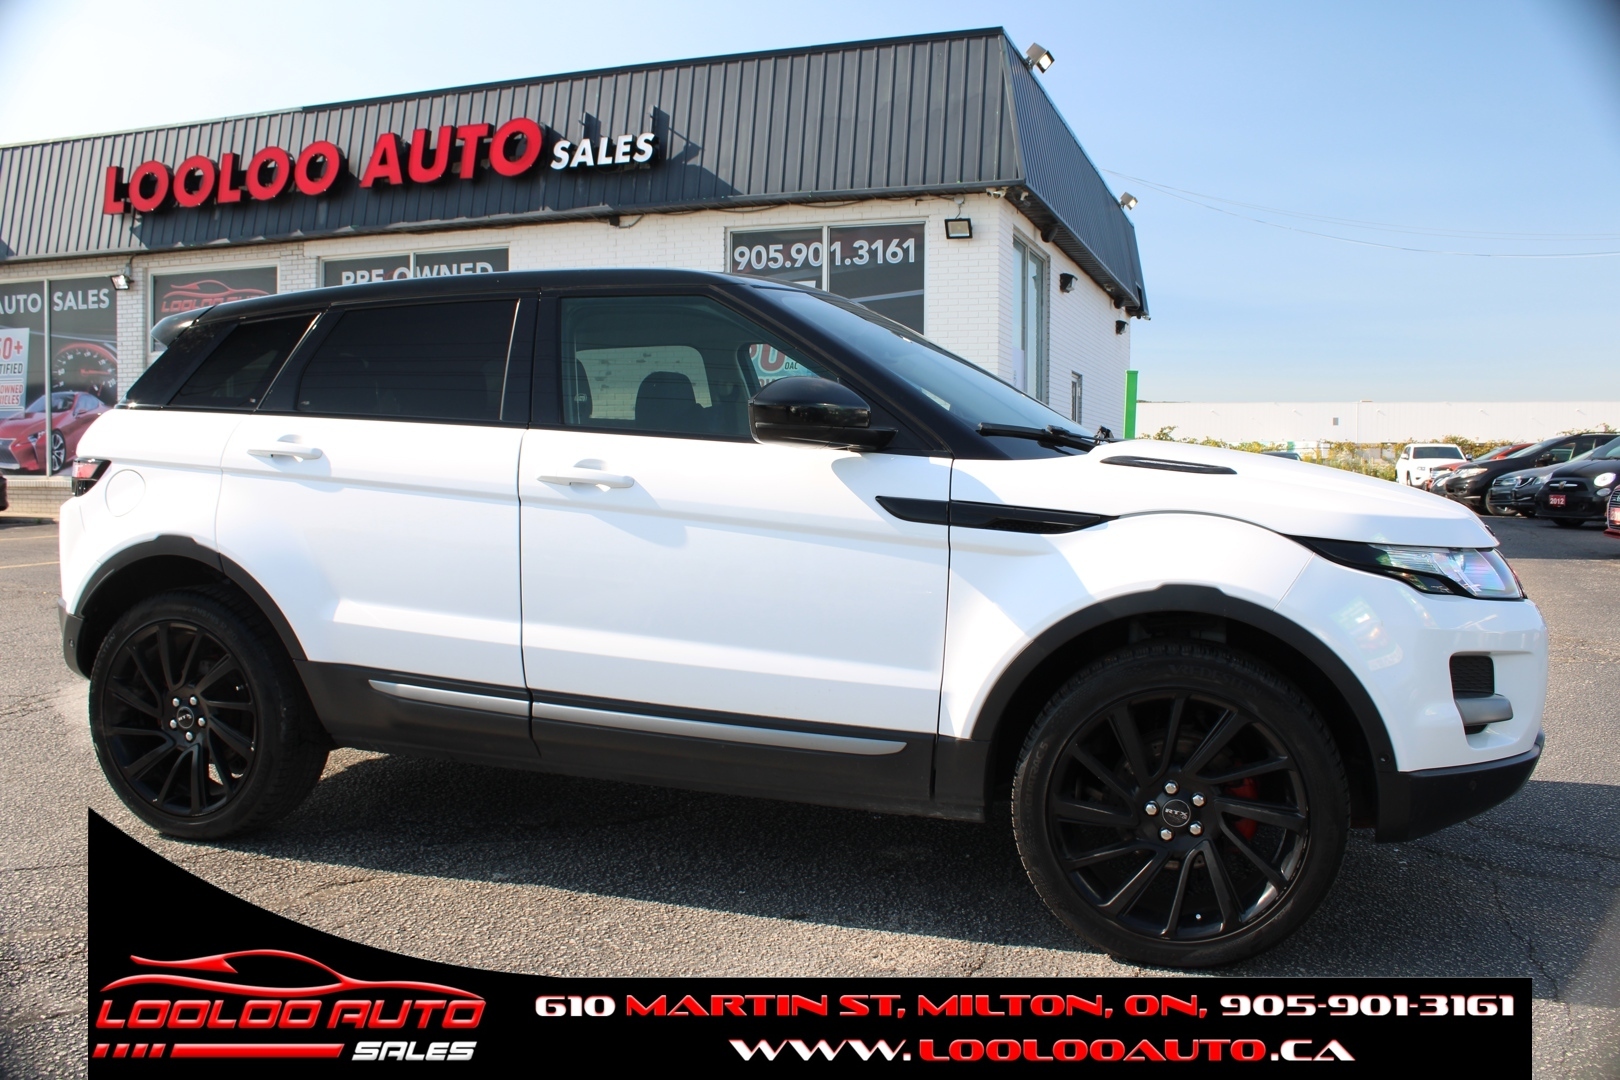 2015 Land Rover Range Rover Evoque Pure Plus Camera Navigation $118/Weekly Certified